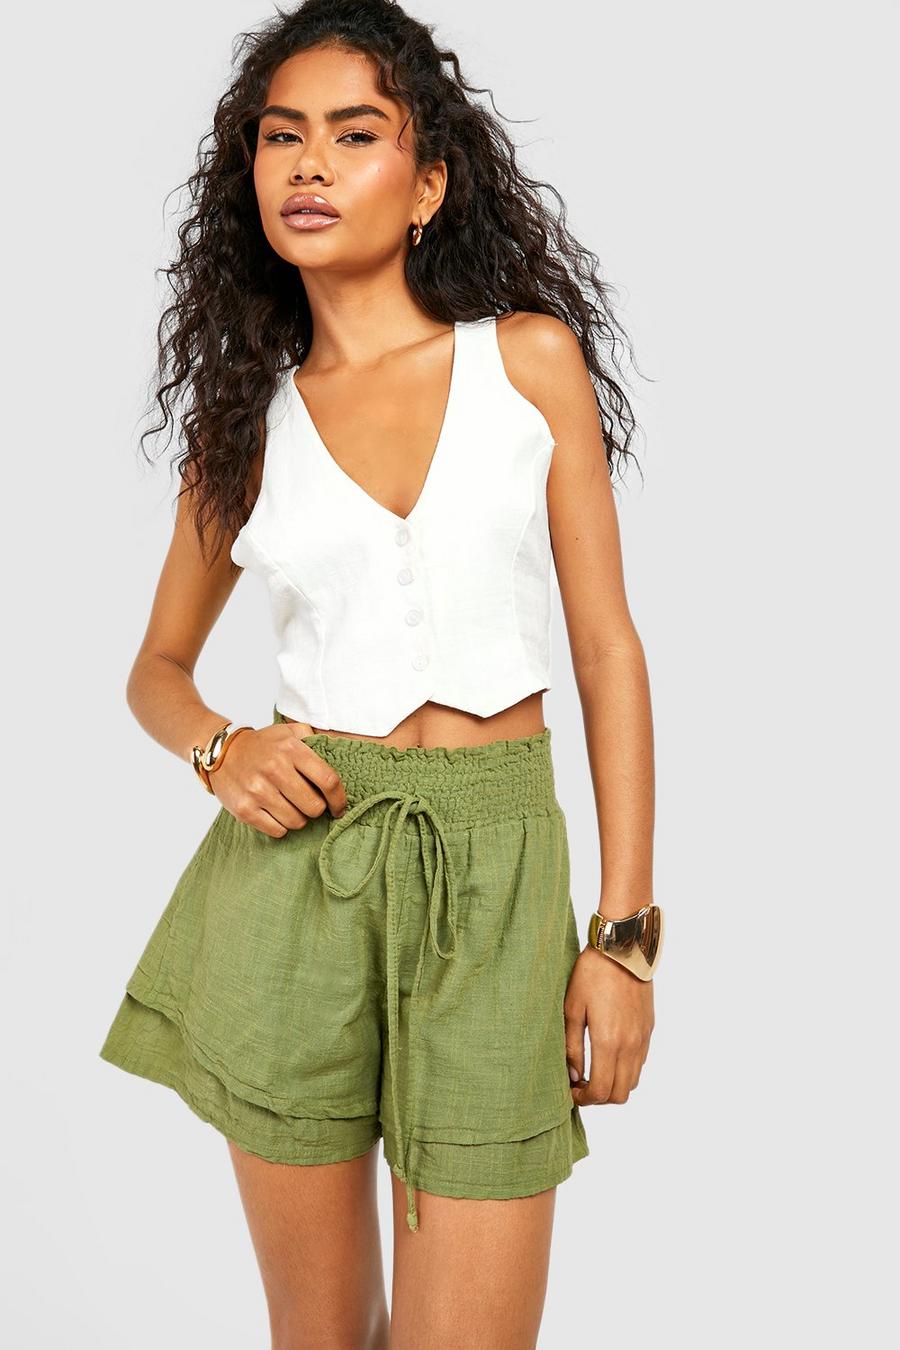 RQYYD Clearance Womens Summer Cotton Linen Shorts Cute Ruffles Wide Leg  High Waisted Casual Beach Lounge Shorts with Pockets(Army Green,M) 